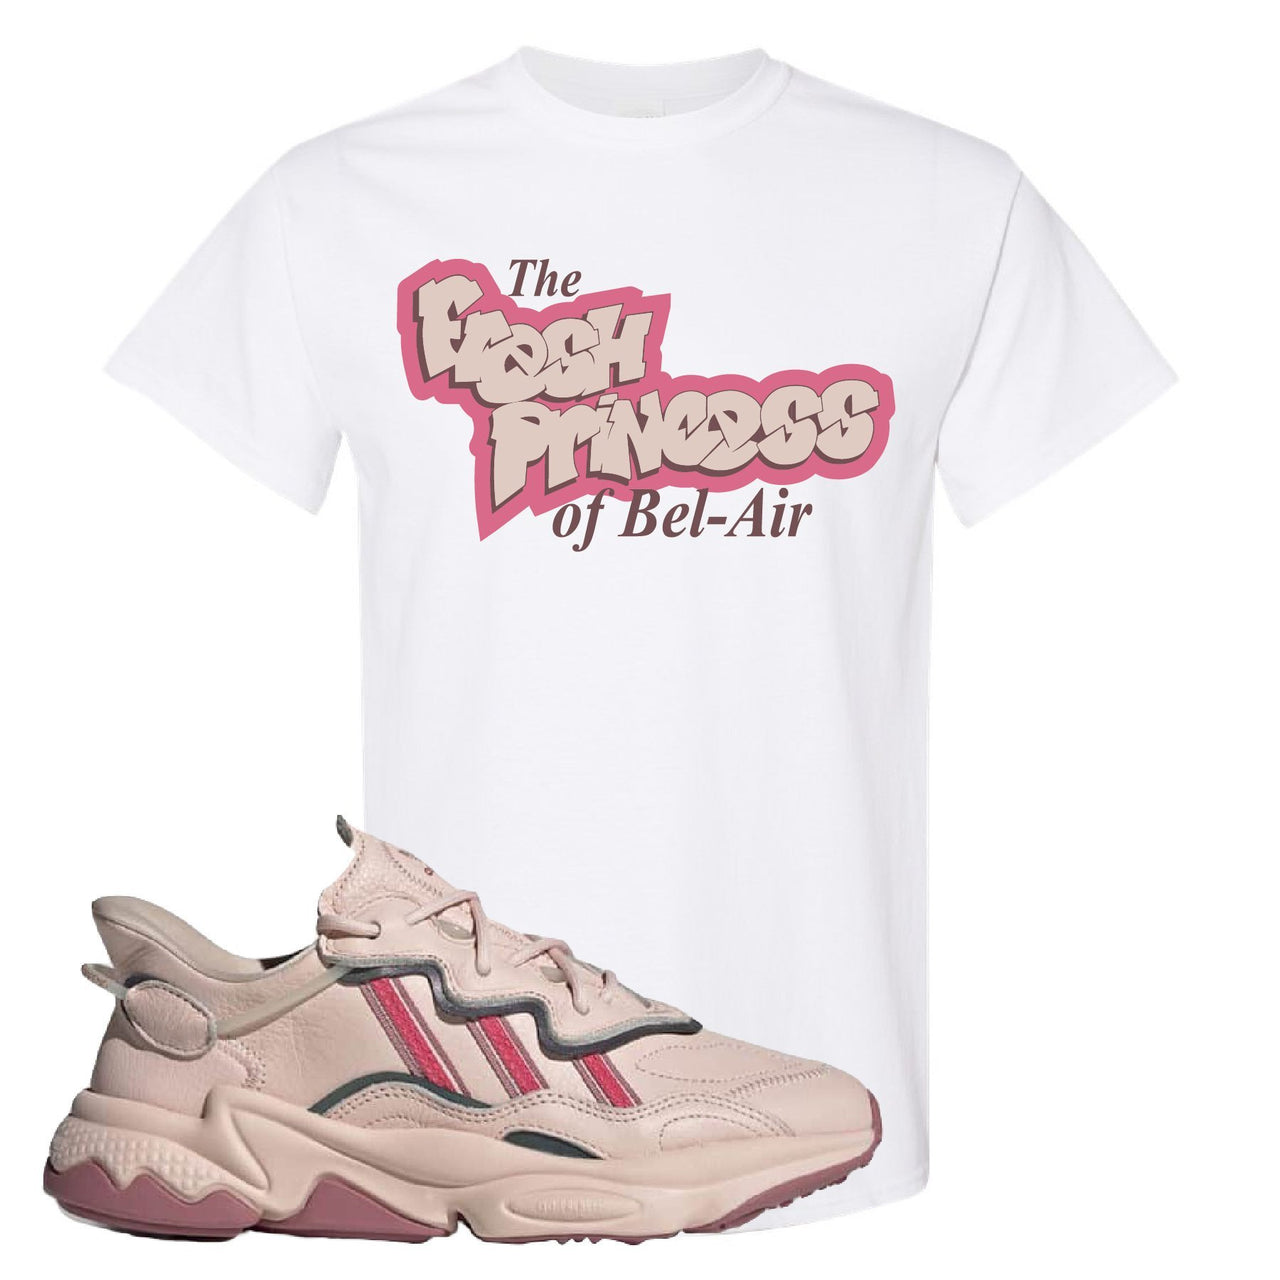 Adidas WMNS Ozweego Icy Pink Fresh Princess of Bel Air White Sneaker Hook Up Tee Shirt